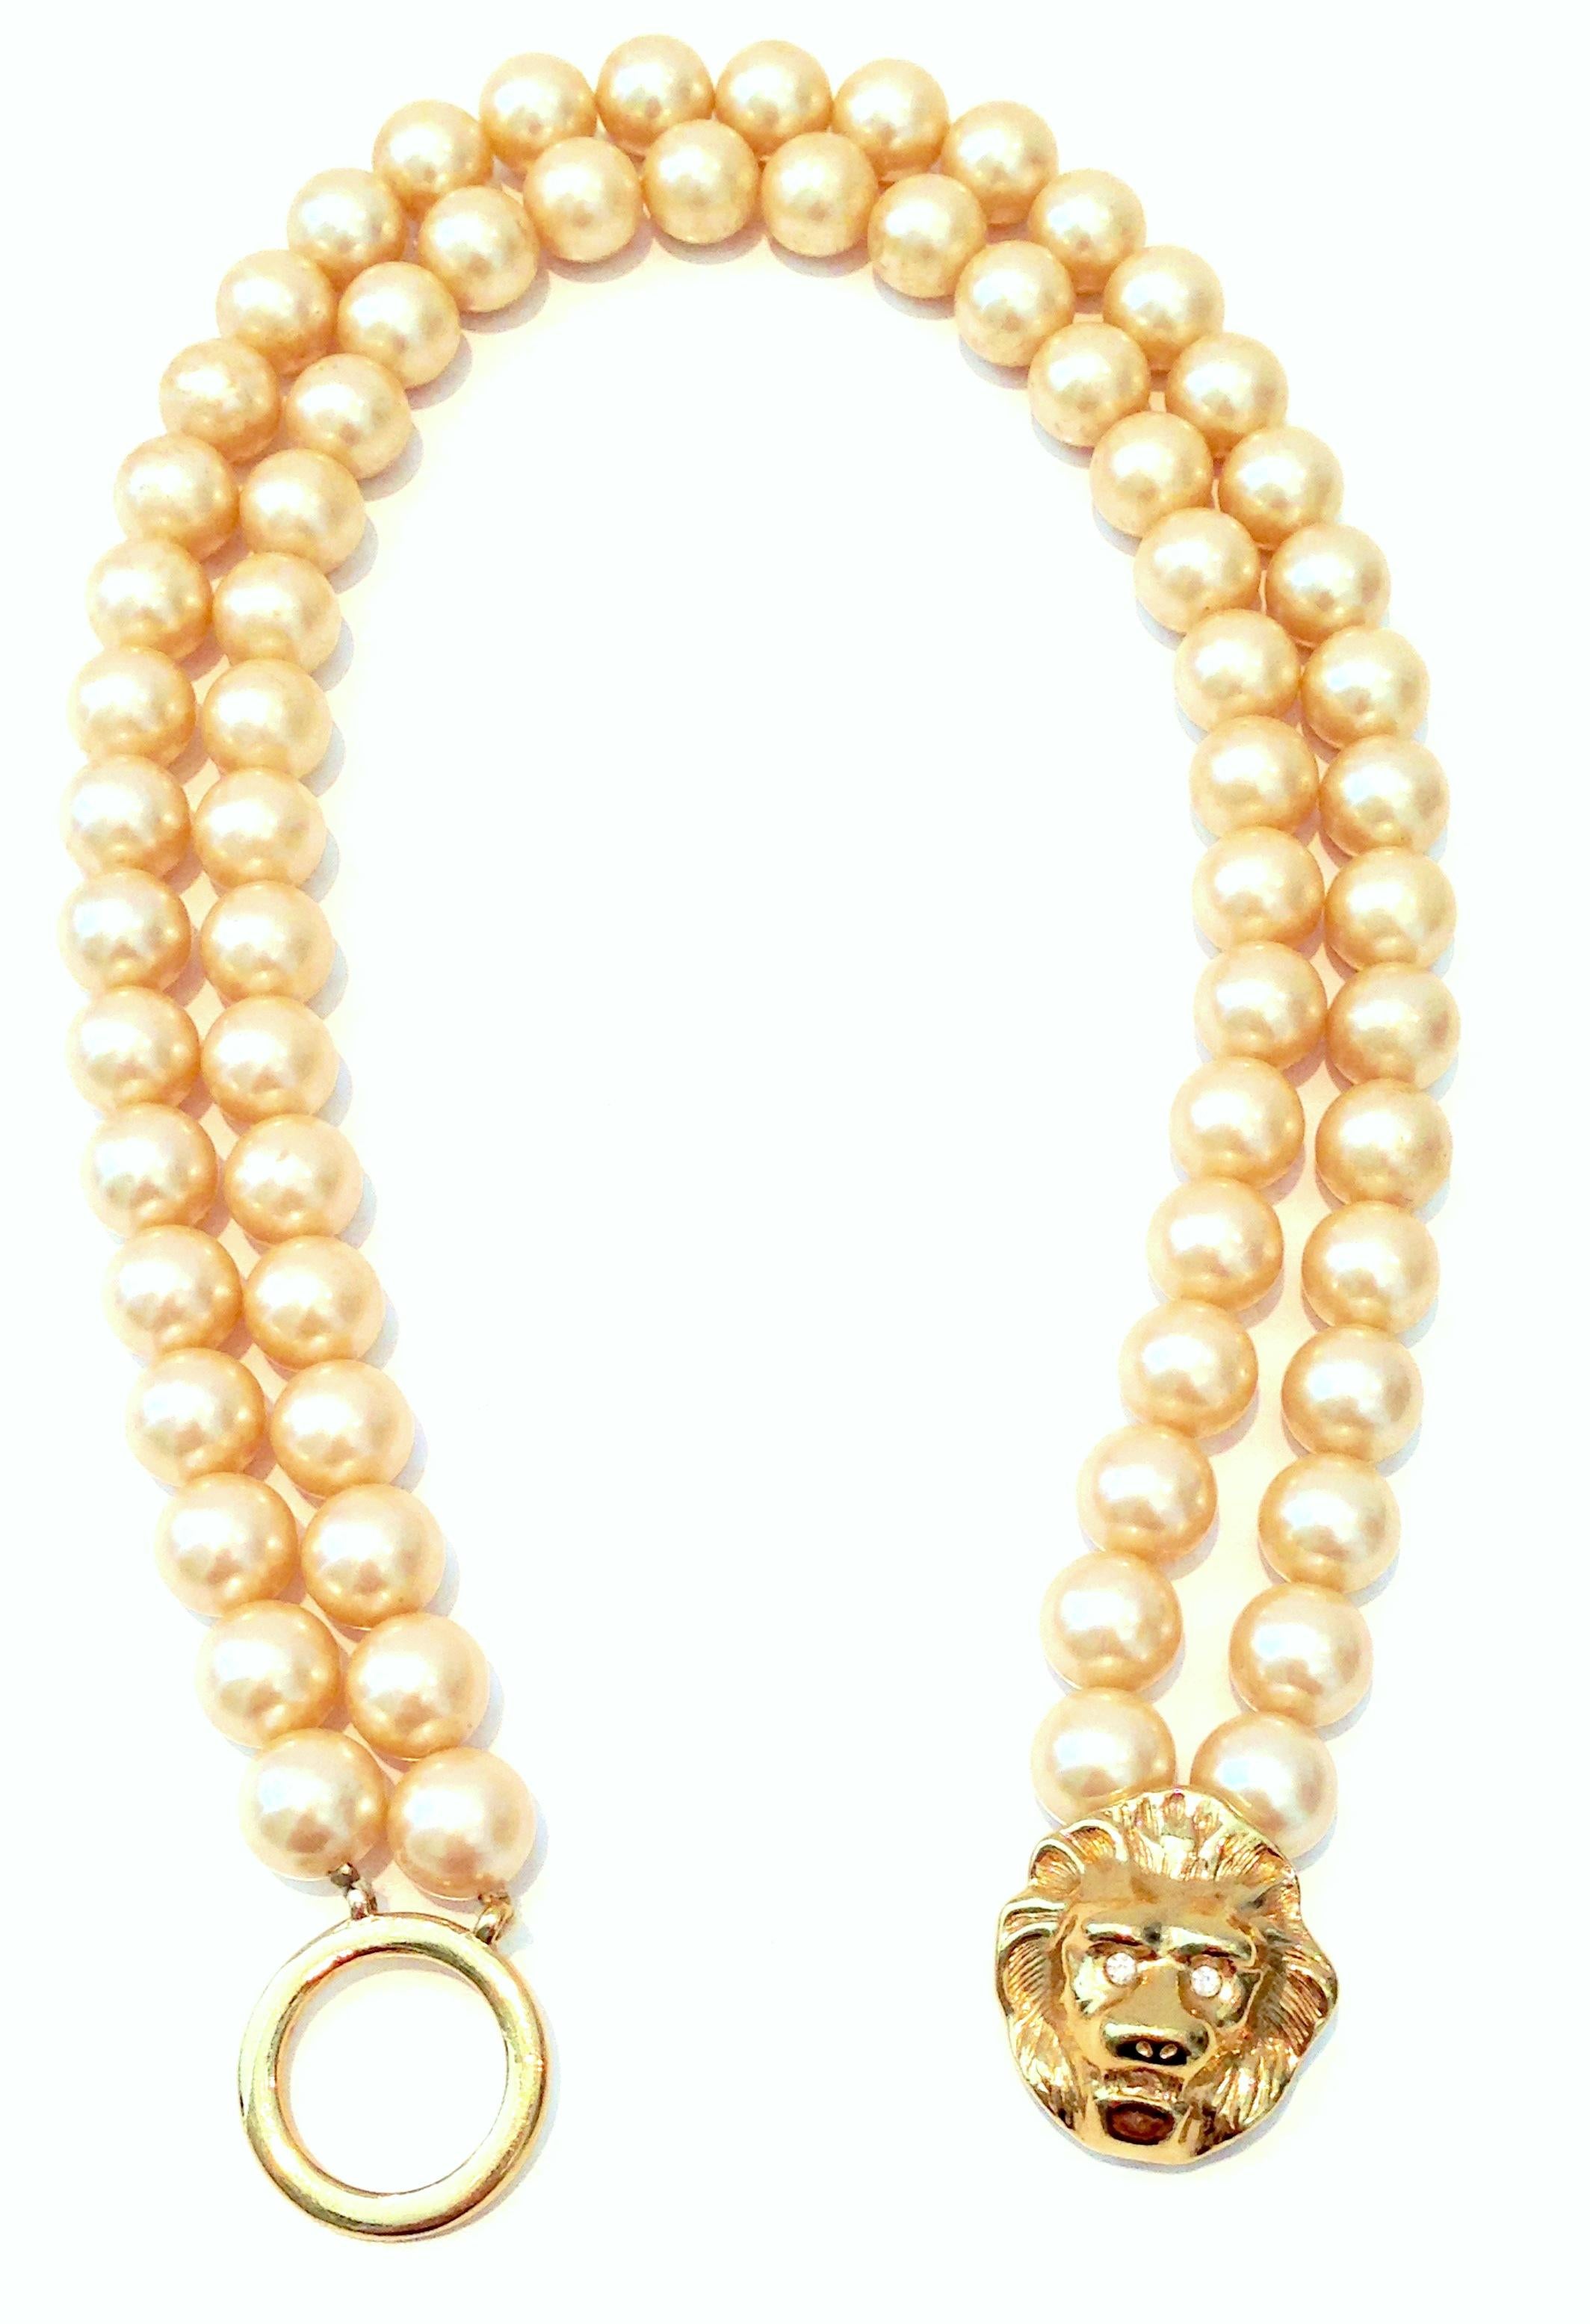 20th Century Kenneth Jay Lane Double Strand Faux Pearl, Austrian Crystal & Gold Lion Head Choker style Necklace. Features a double strand of faux off white faux pearl beads and a Gold plate with colorless brilliant cut and faceted Austrian Crystal